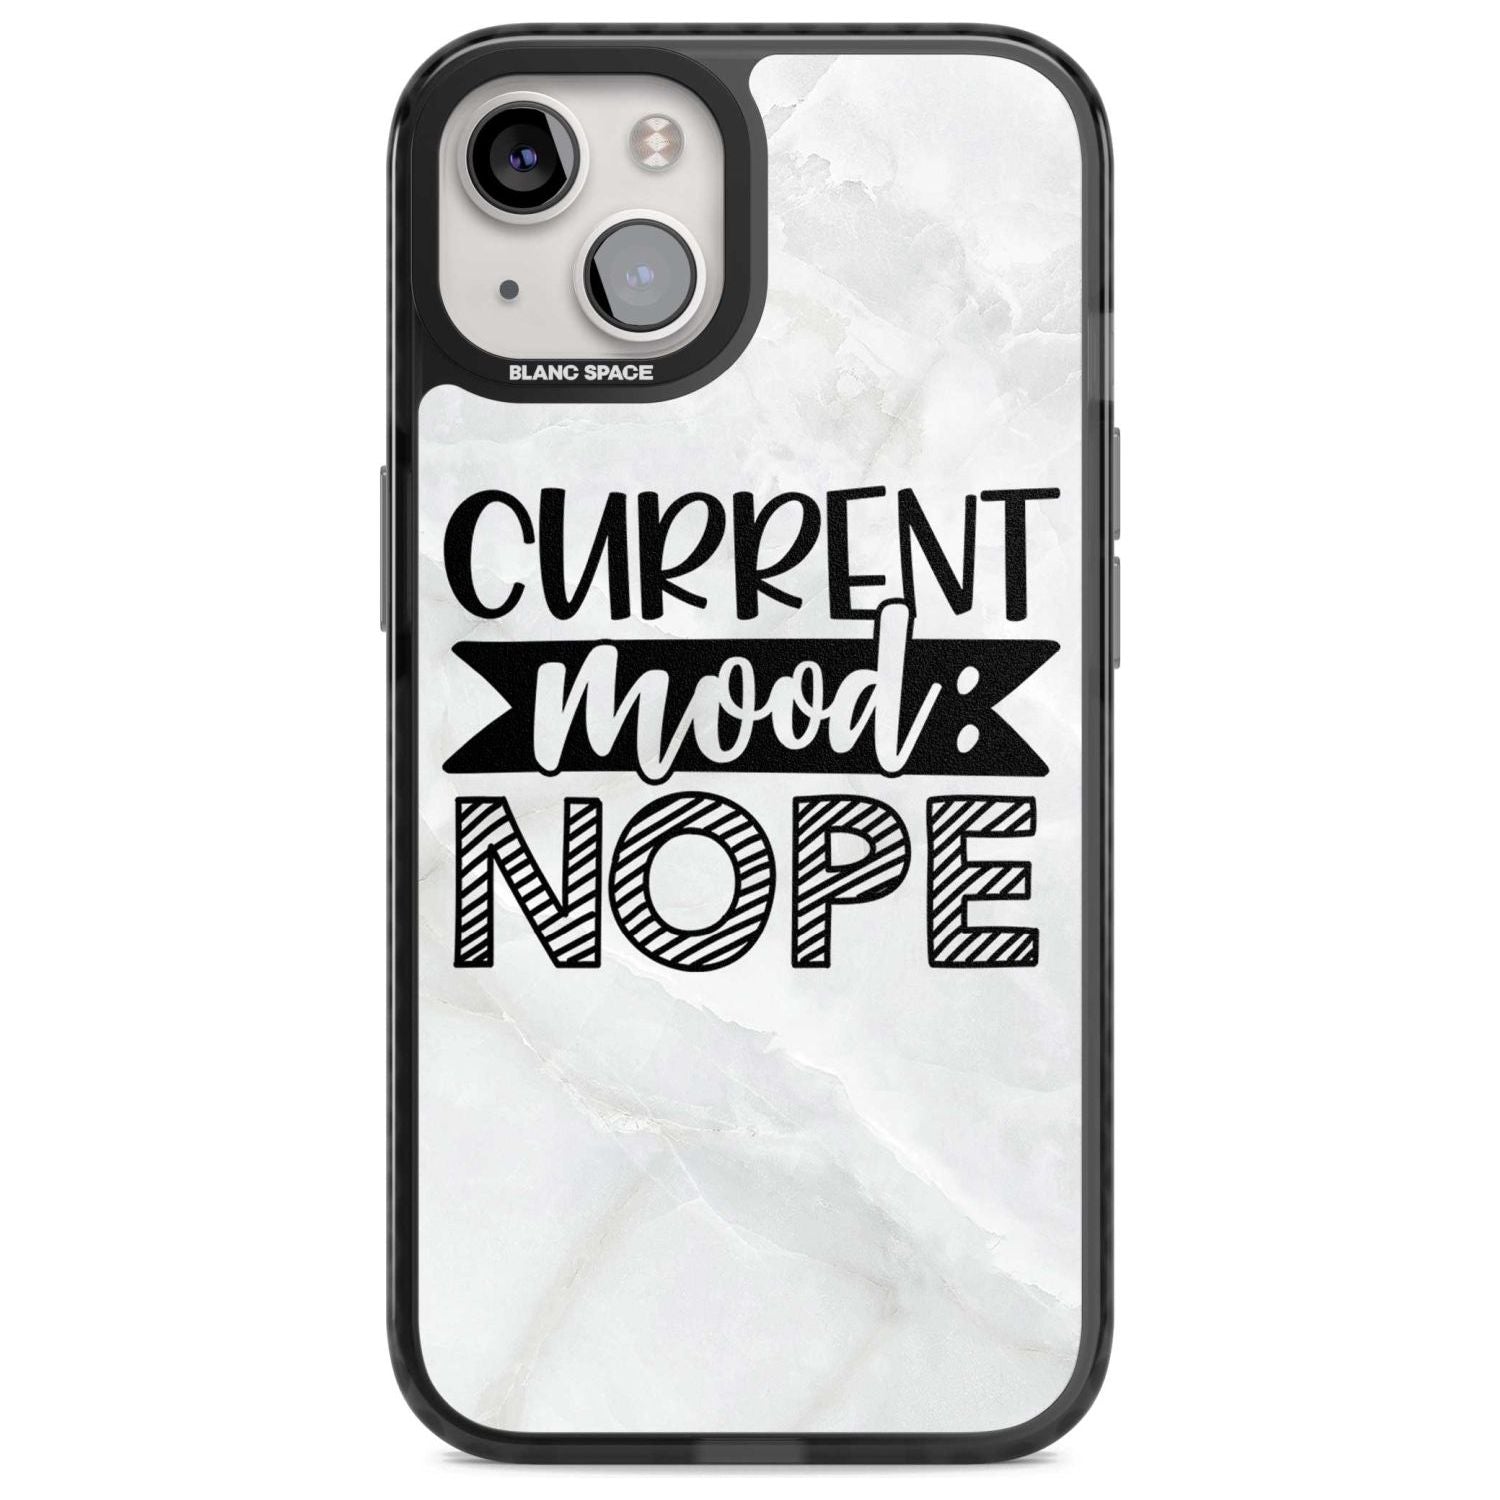 Current Mood NOPE Phone Case iPhone 15 / Magsafe Black Impact Case,iPhone 15 Plus / Magsafe Black Impact Case,iPhone 13 / Magsafe Black Impact Case,iPhone 14 / Magsafe Black Impact Case,iPhone 14 Plus / Magsafe Black Impact Case Blanc Space